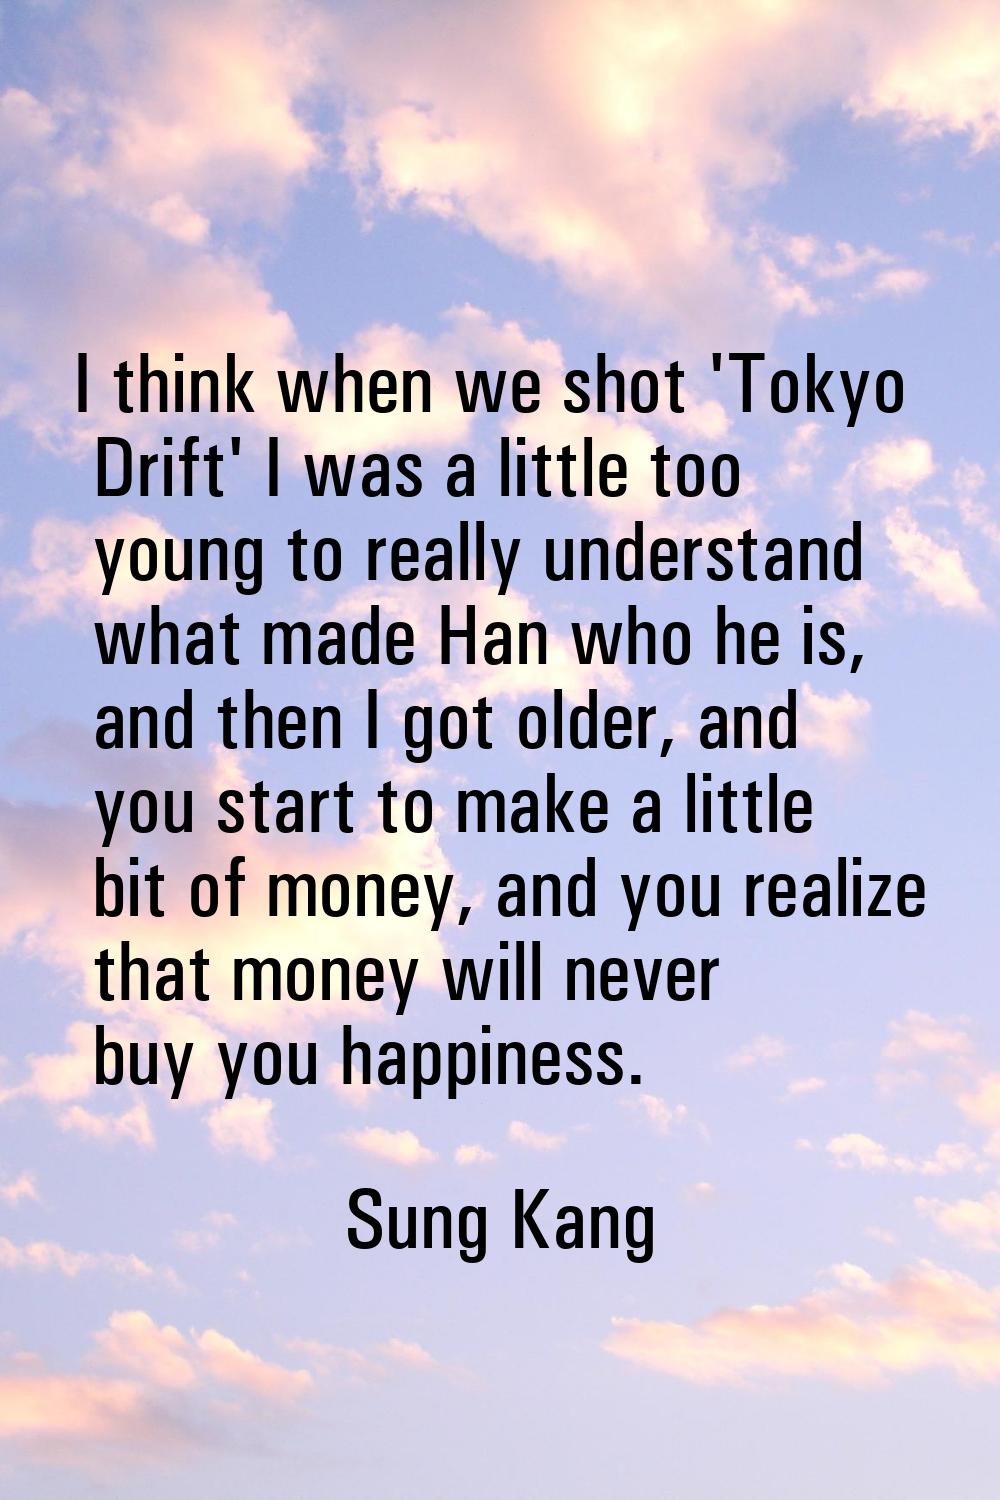 I think when we shot 'Tokyo Drift' I was a little too young to really understand what made Han who 